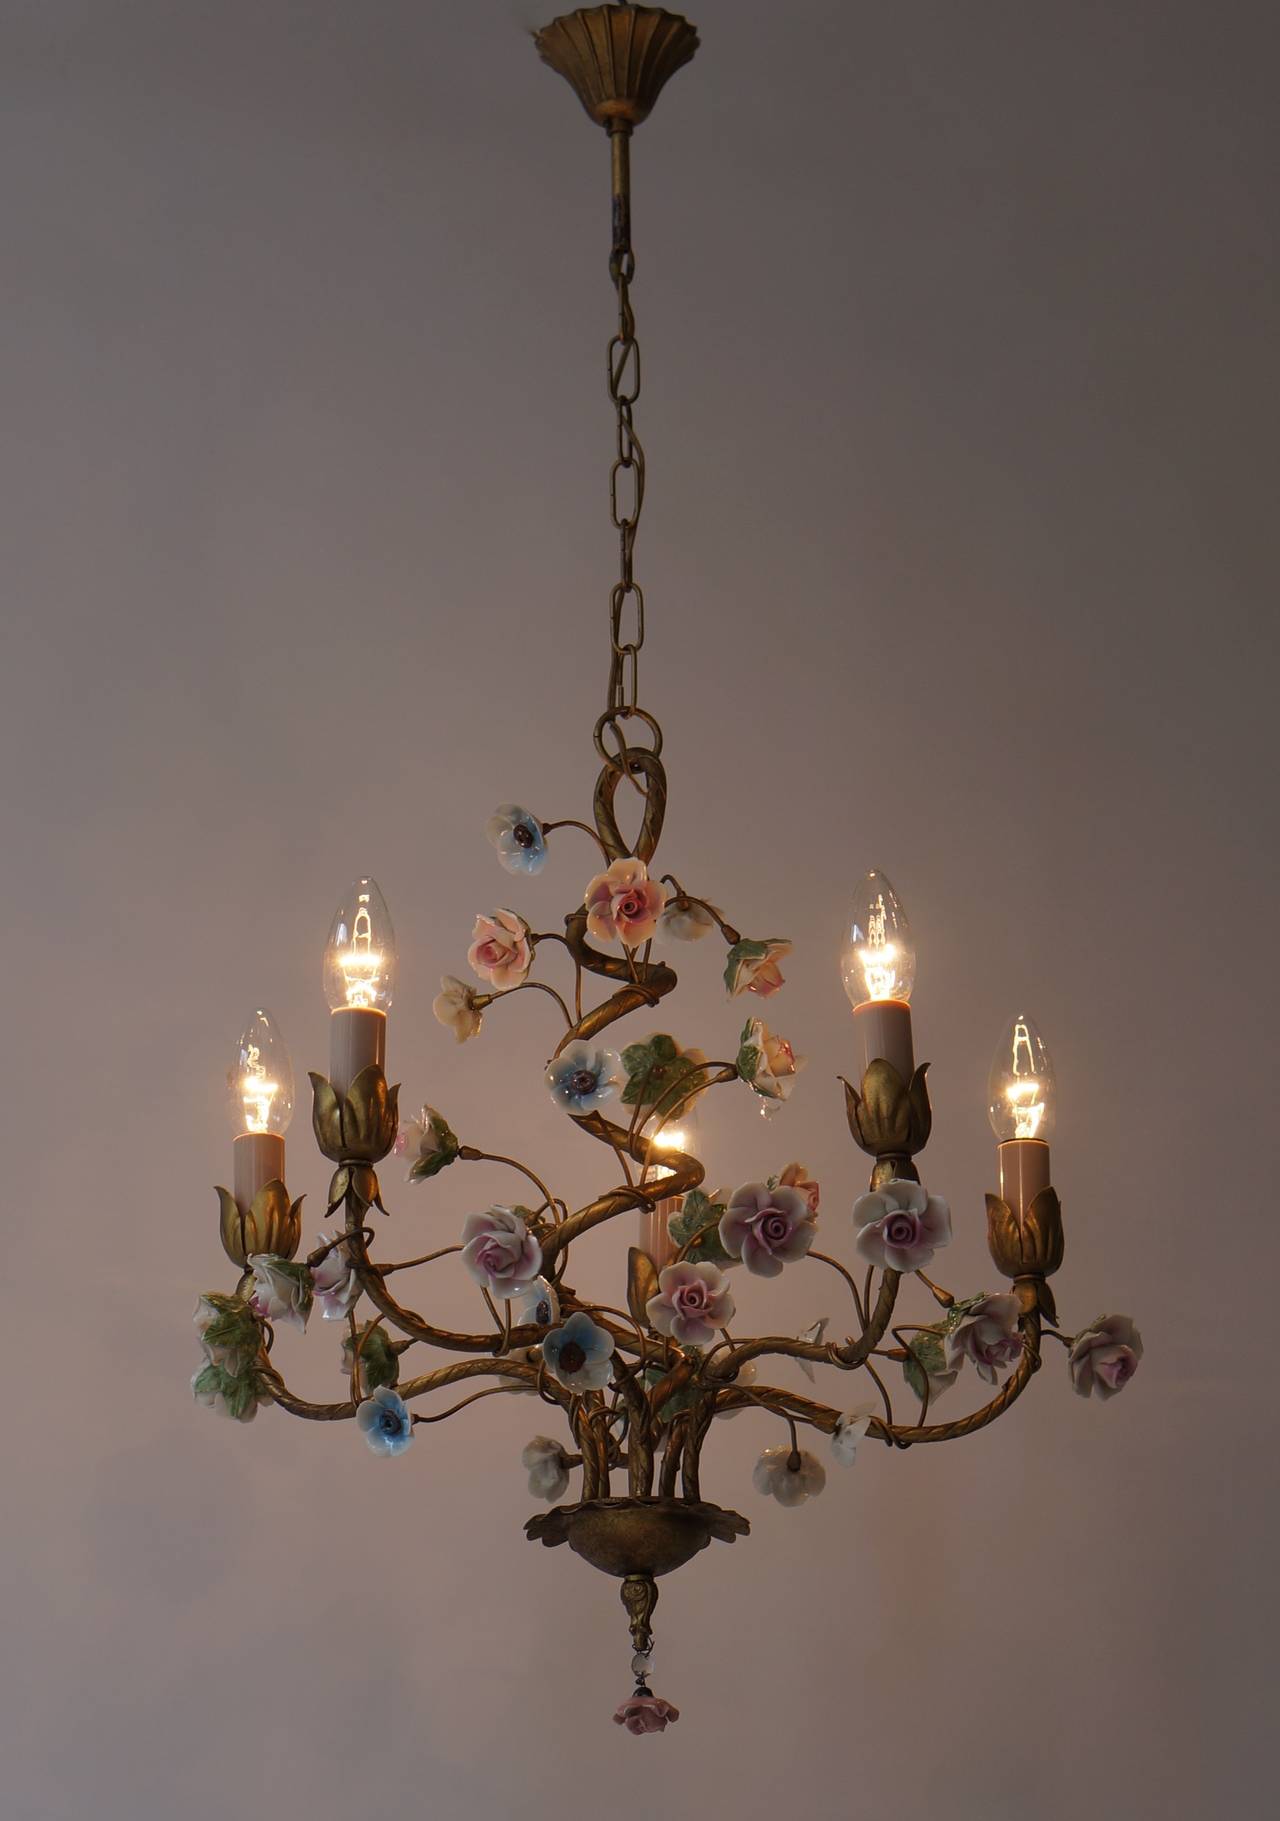 Italian tole chandelier with porcelain flowers. This beautiful five-light handmade chandelier will look great in any room.